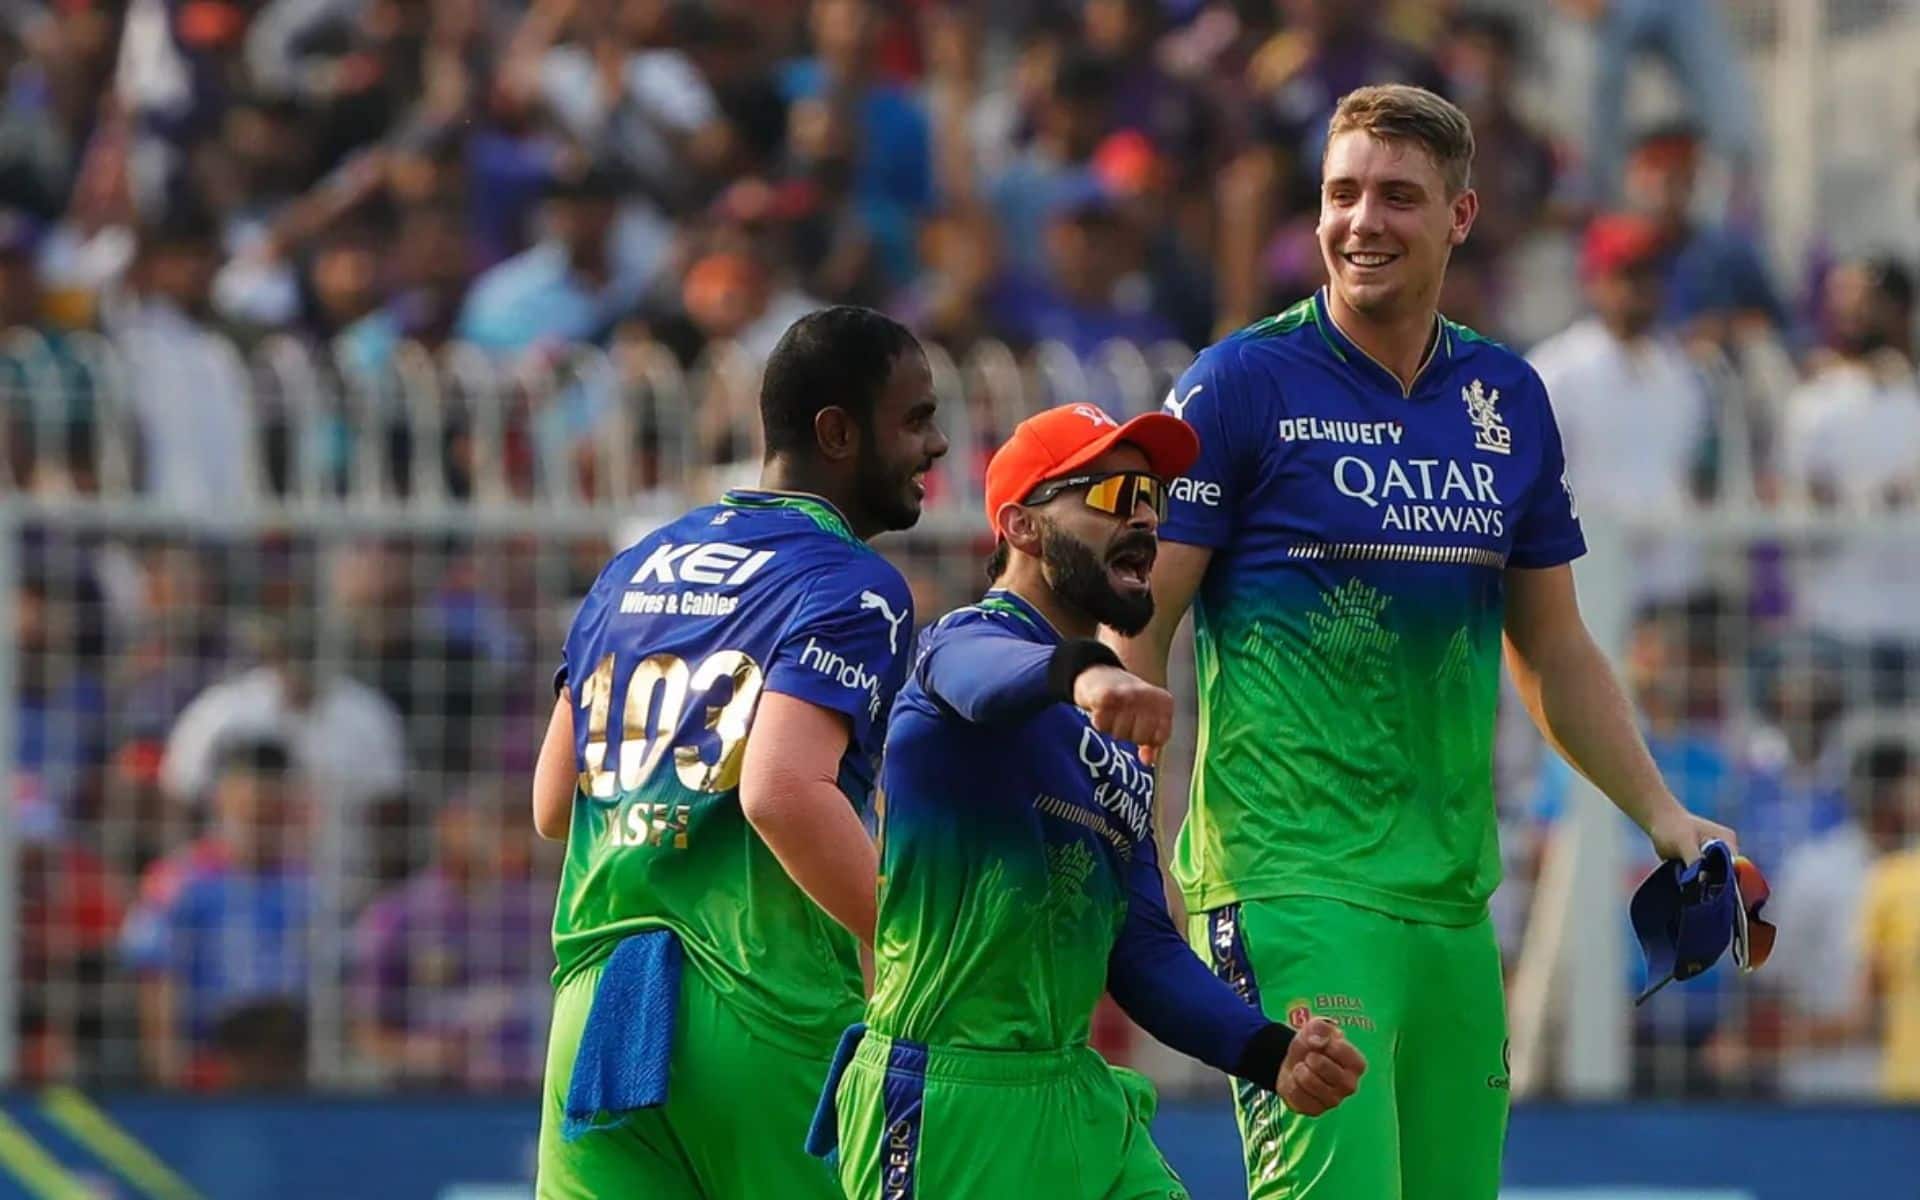 RCB players celebrating a wicket during KKR clash on Sunday (BCCI)